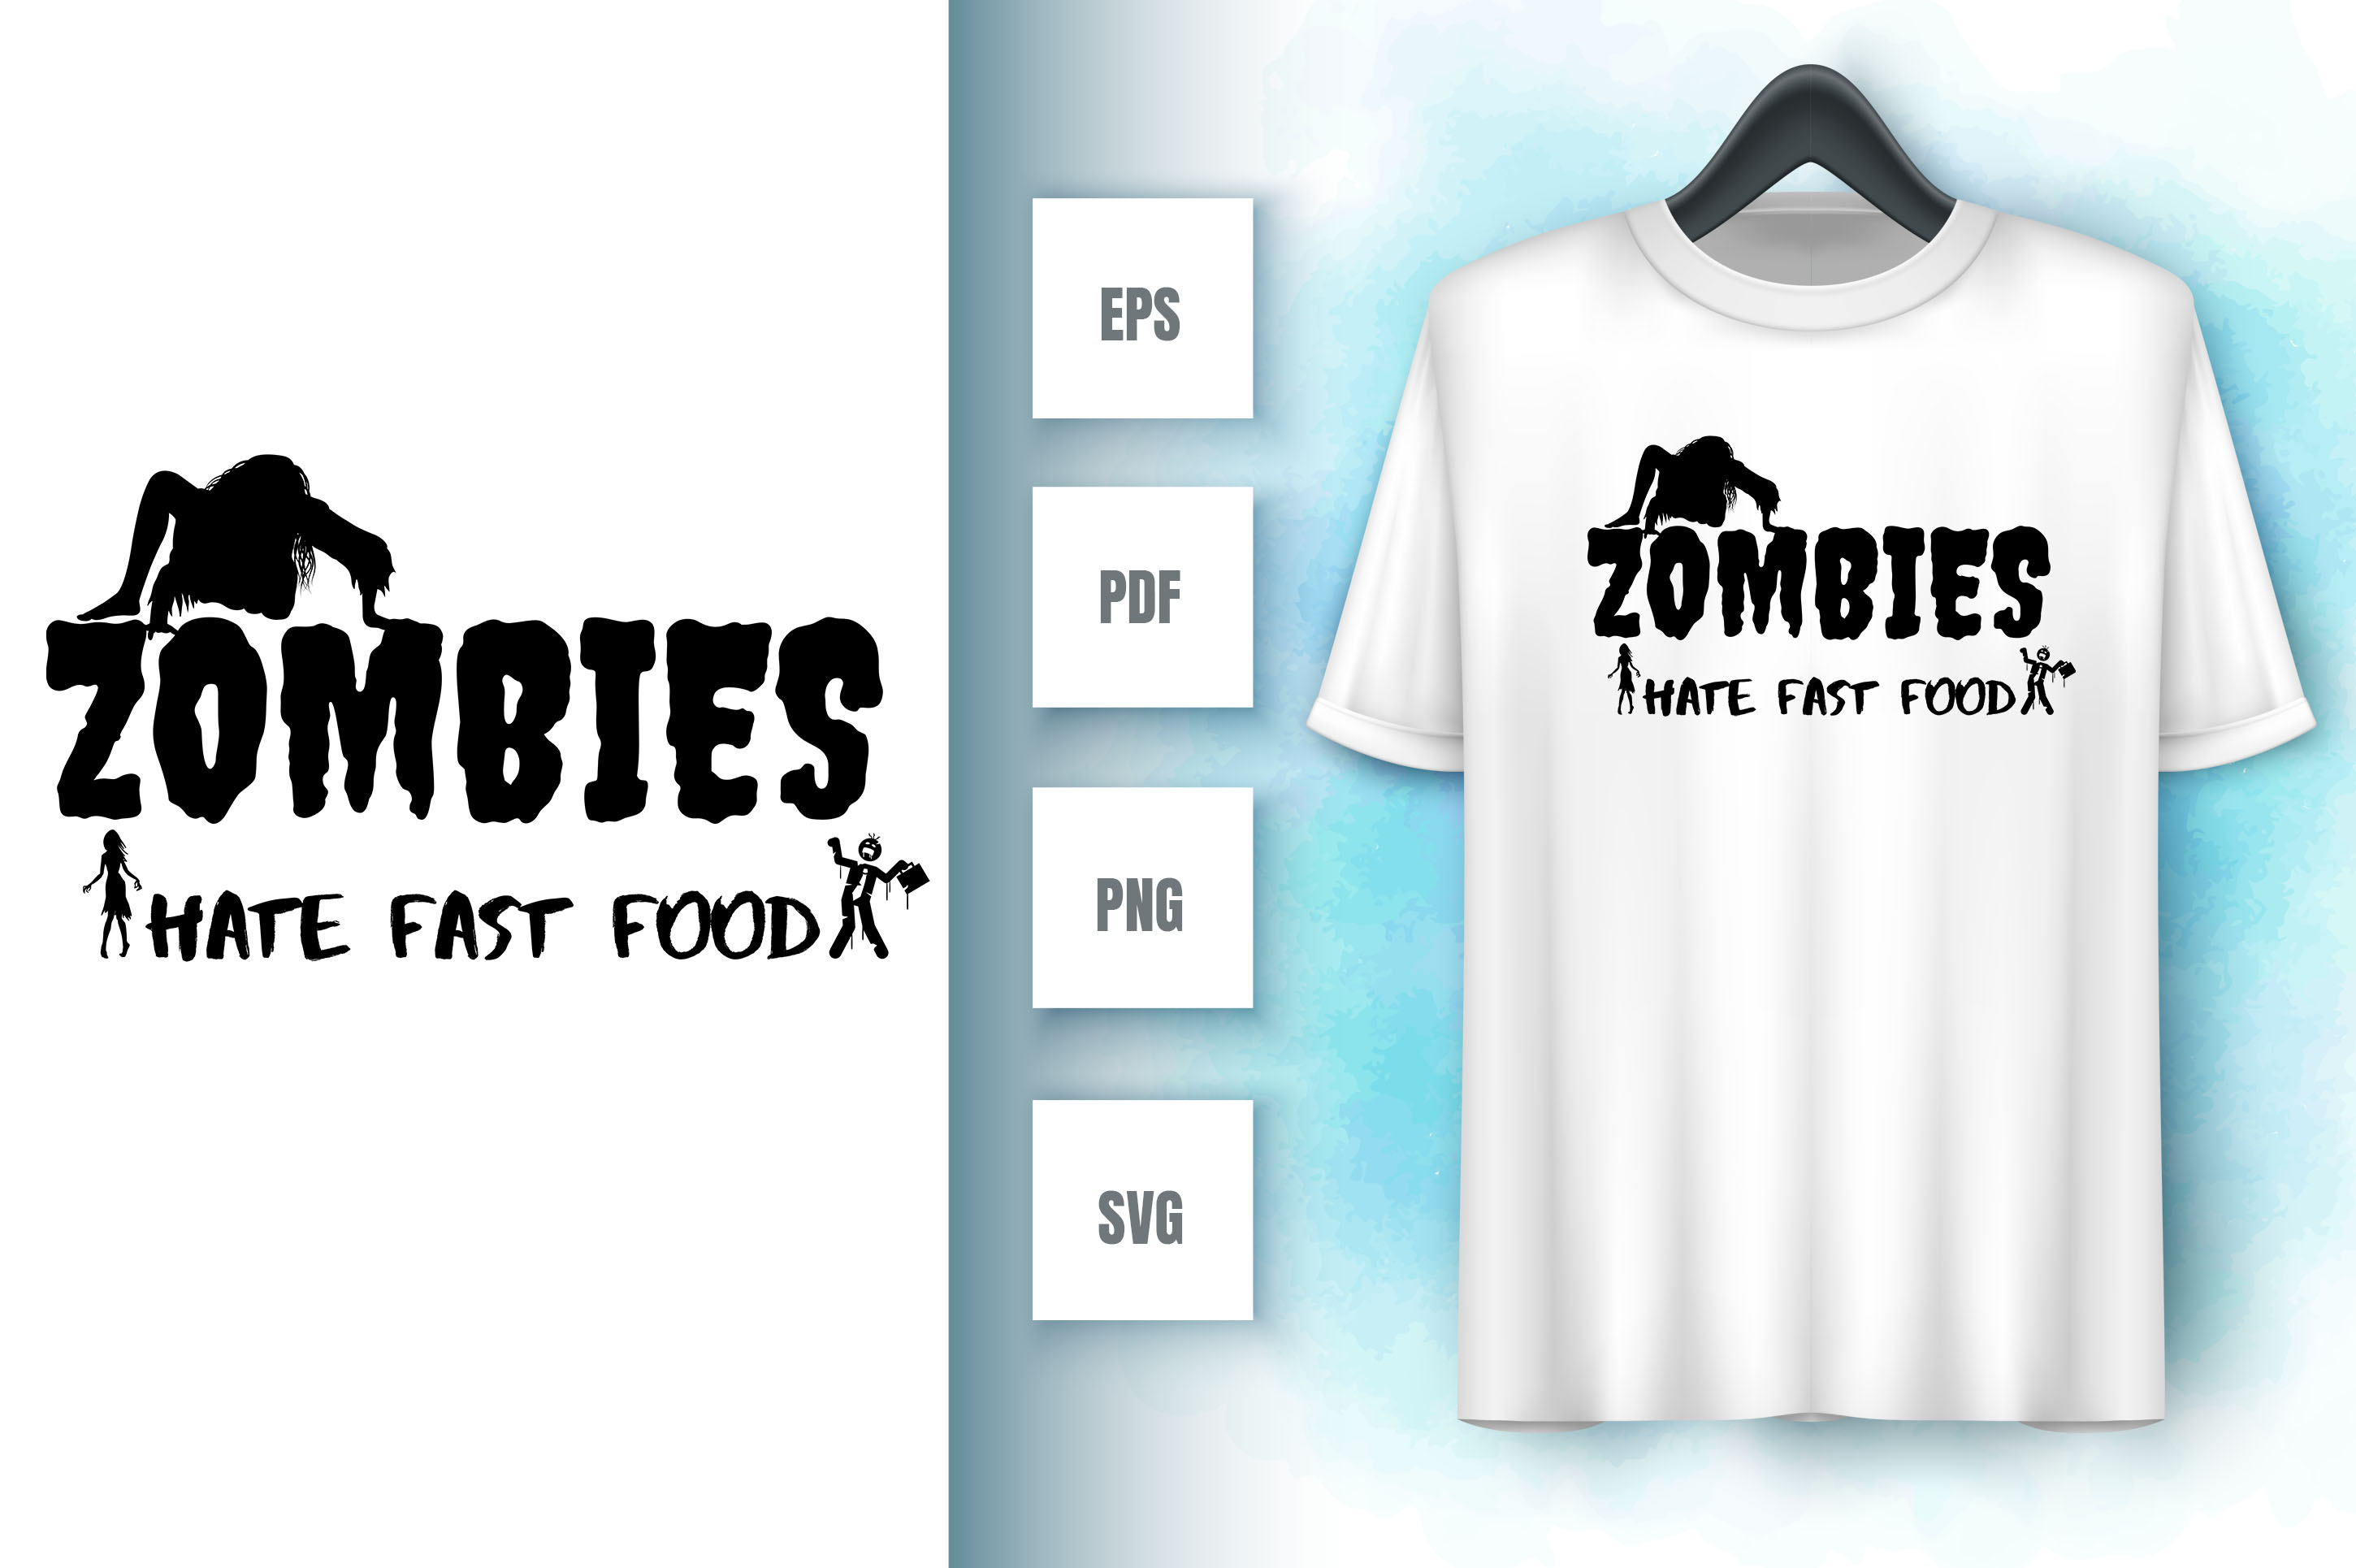 Image of a white t-shirt with an amazing inscription zombies hate fast food